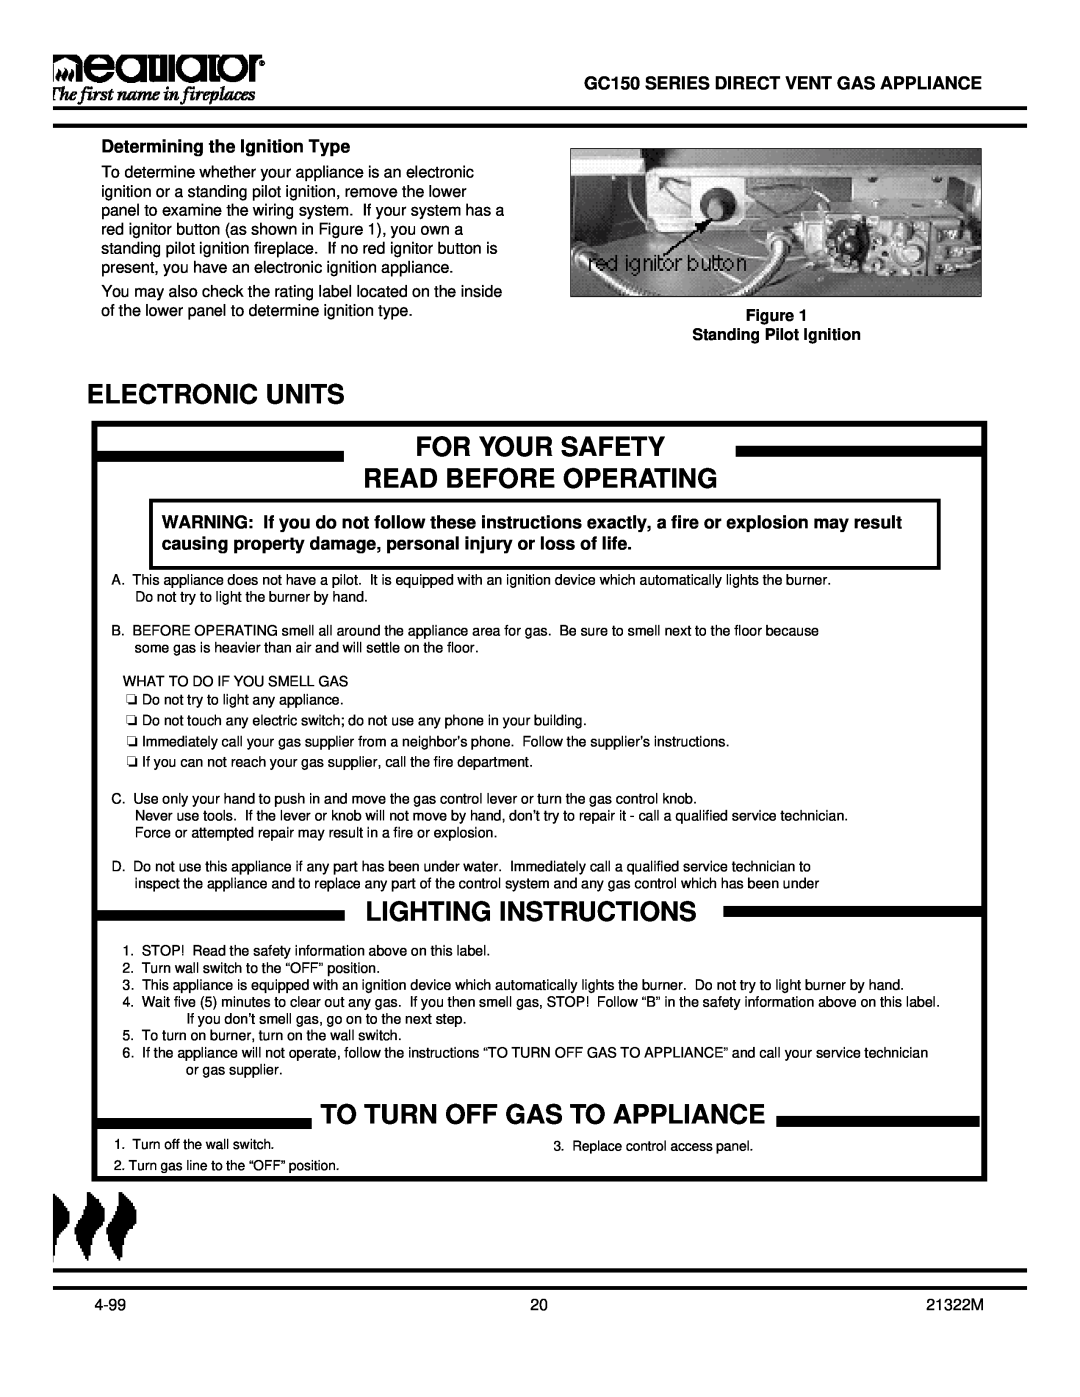 Heatiator GC150 owner manual Electronic Units For Your Safety, Read Before Operating, To Turn Off Gas To Appliance 